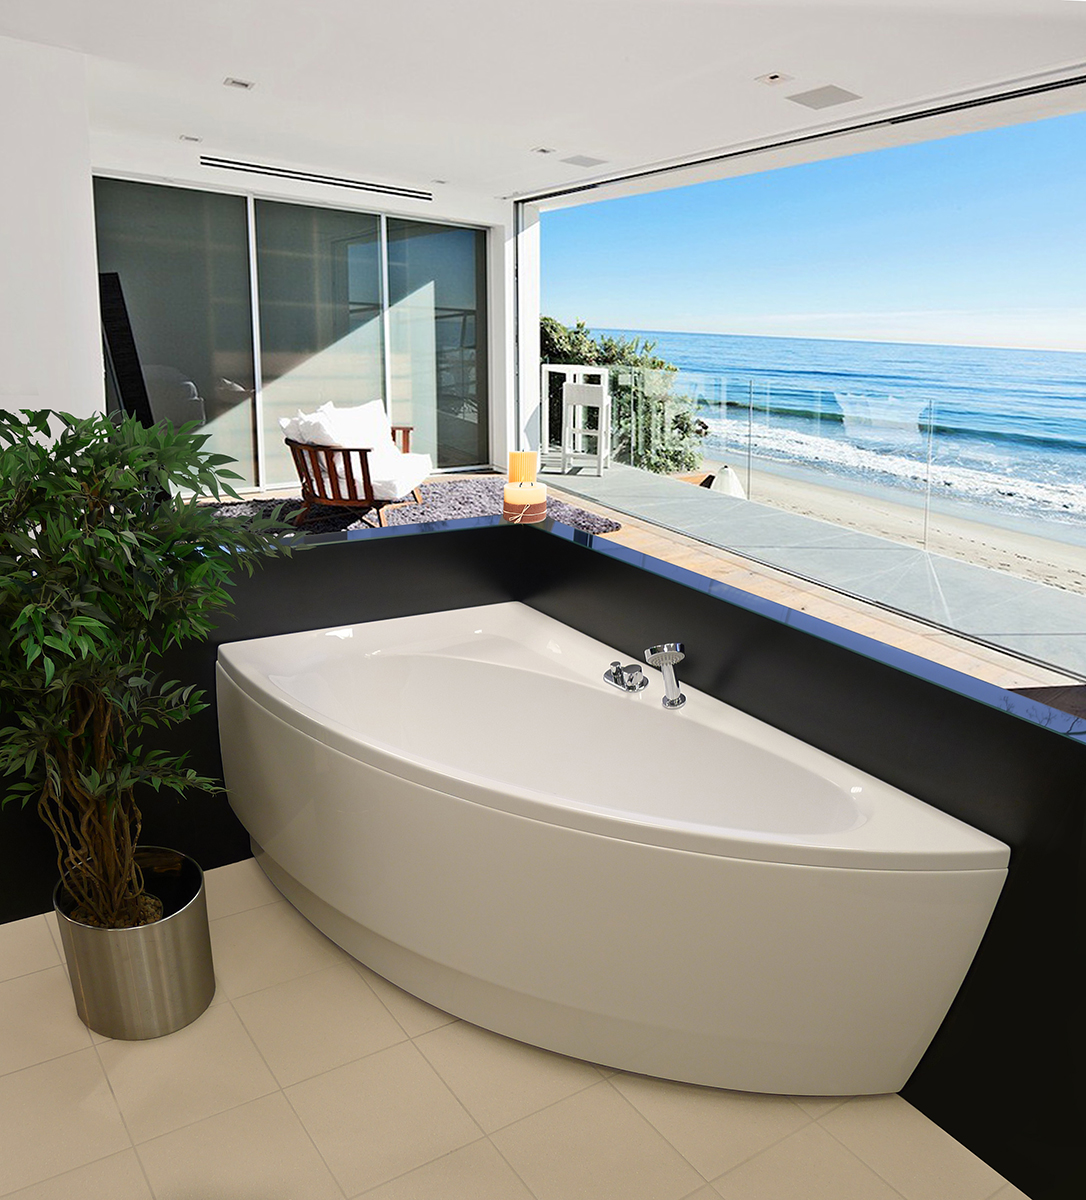 Corner Tub Smart Way To Save Space In, Corner Bathtubs For Small Spaces